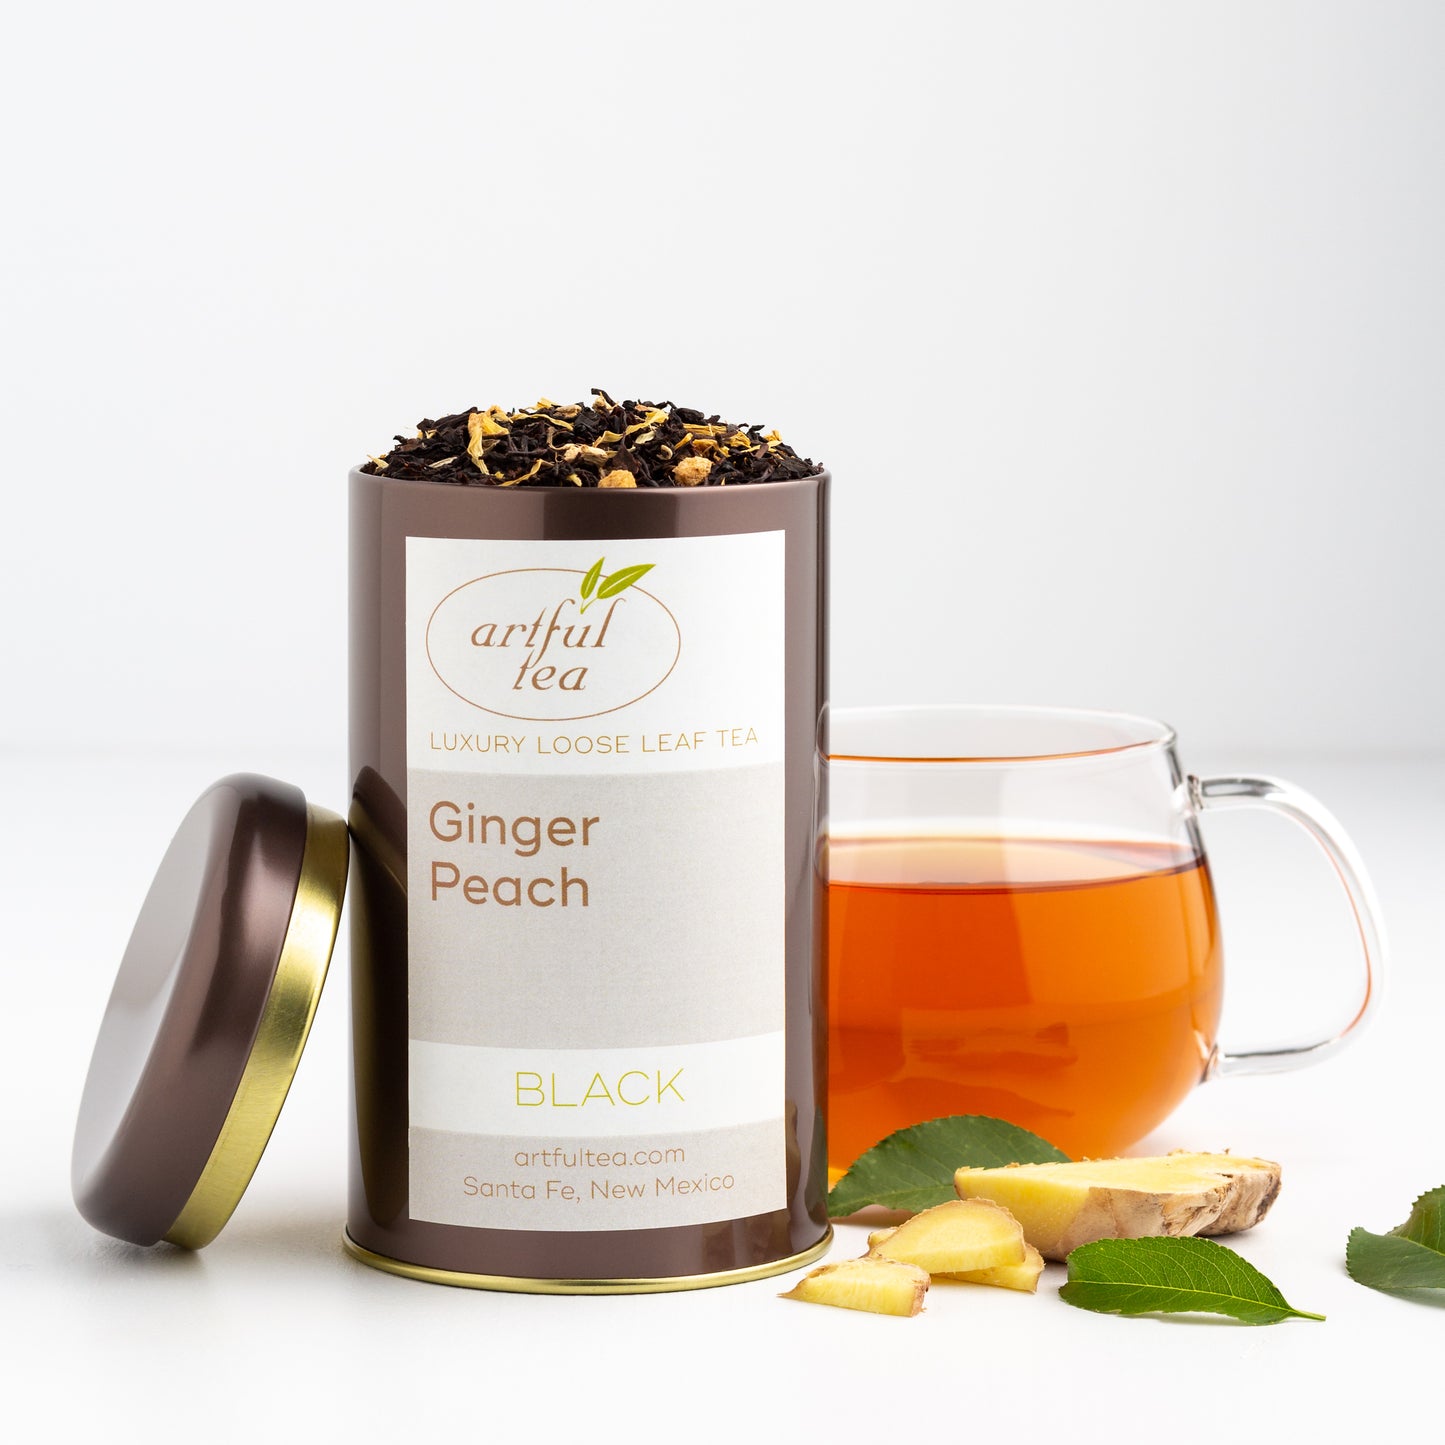 Ginger Peach Black Tea shown packaged in a brown tin with the lid off, next to a glass mug of brewed tea, some slices of fresh ginger root, and three green leaves